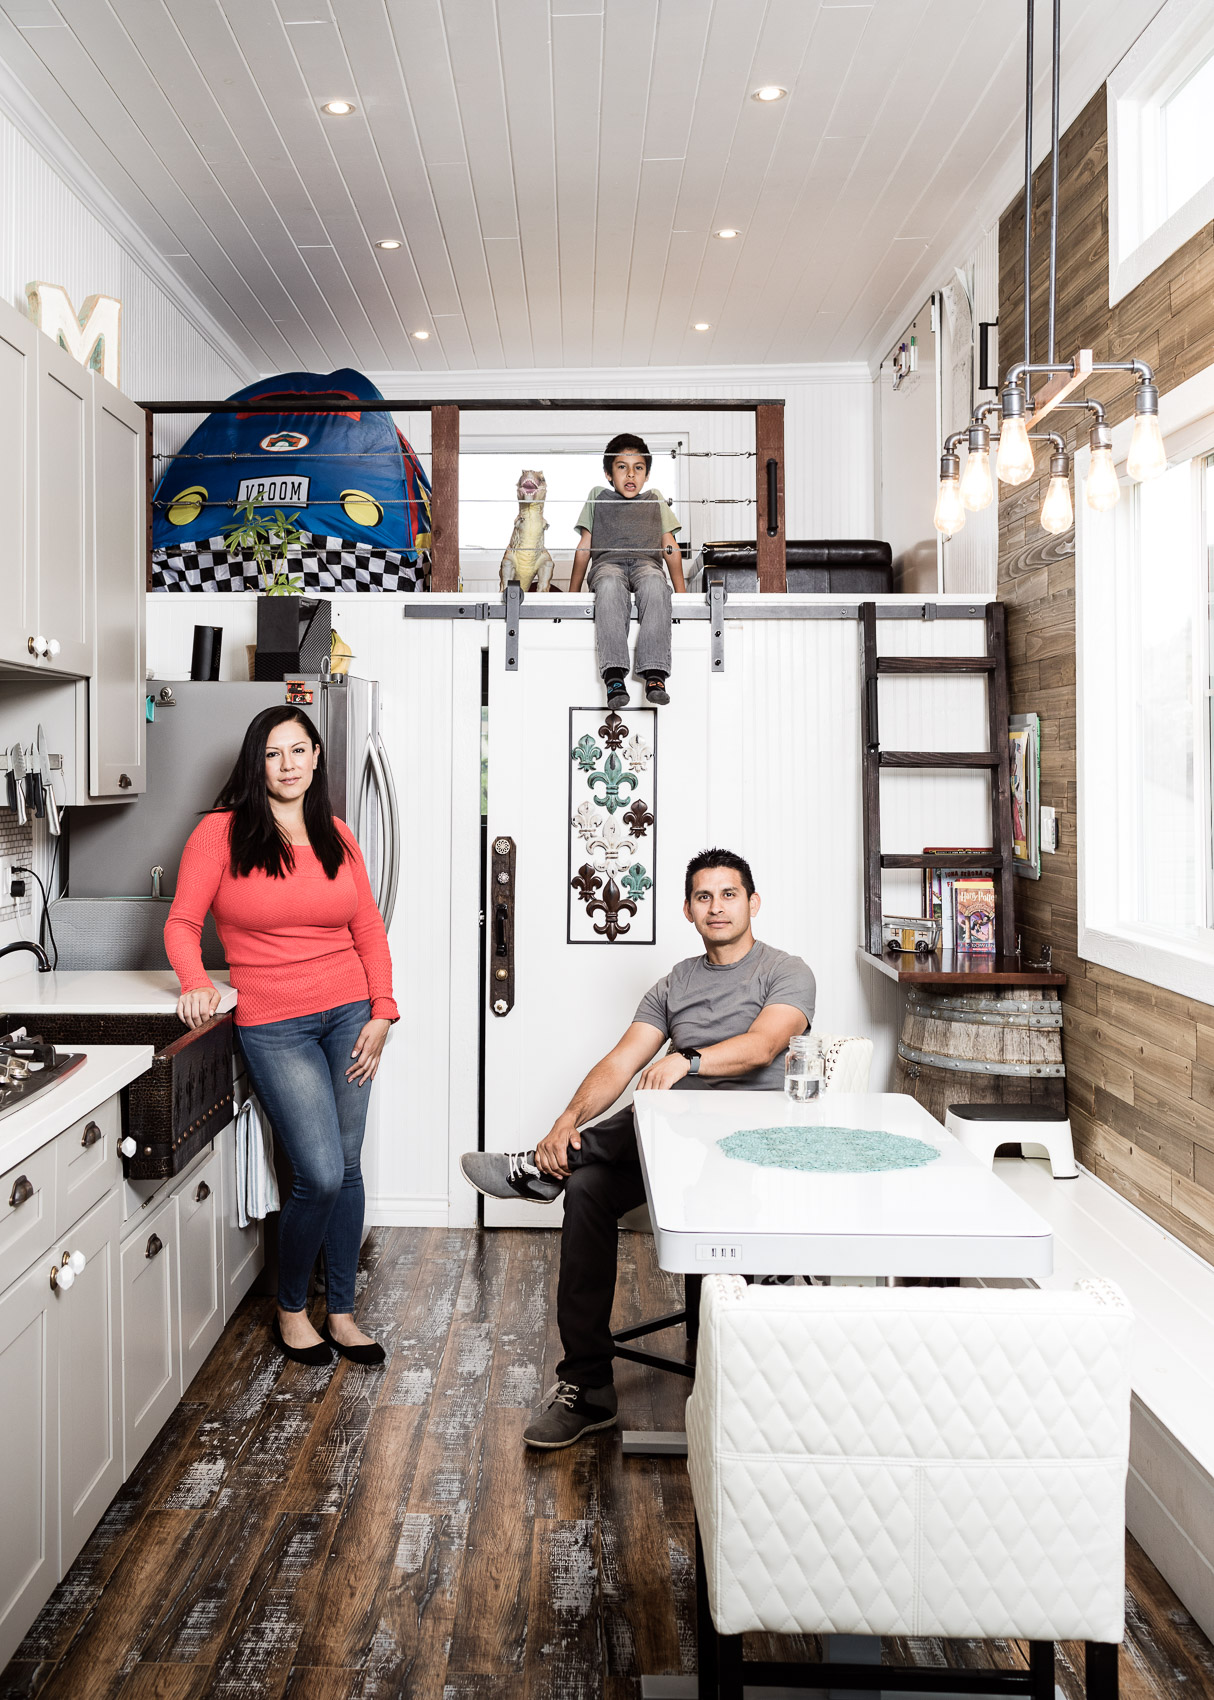 Steven Mejia & his family, Tiny Living LA  | Los Angeles | Editorial and Commercial Photographer Patrick Strattner